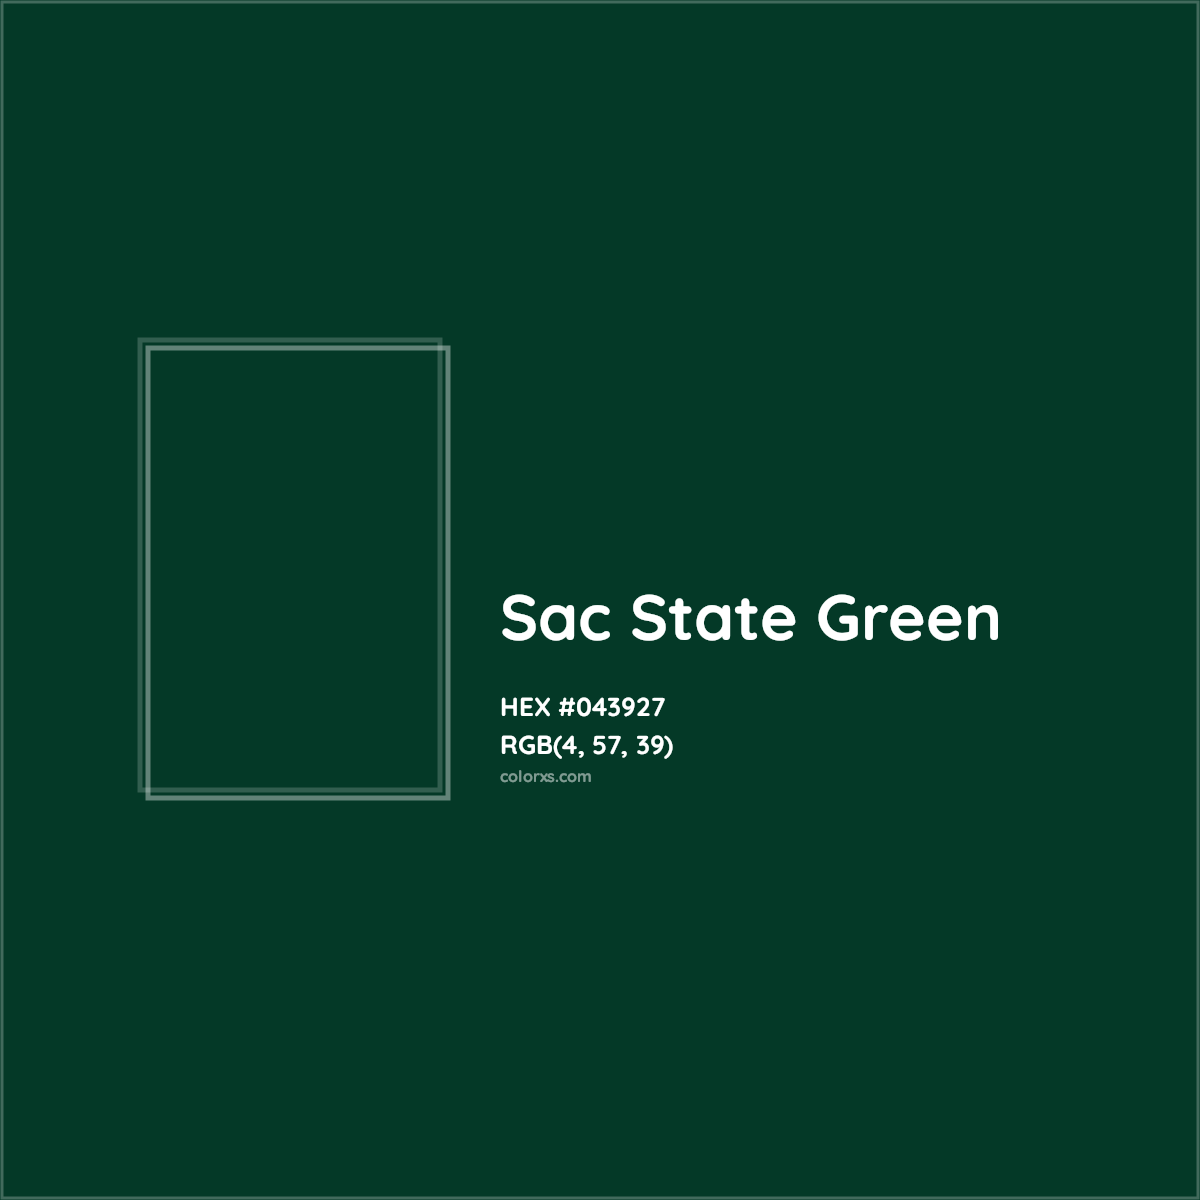 HEX #043927 Sac State Green Other School - Color Code